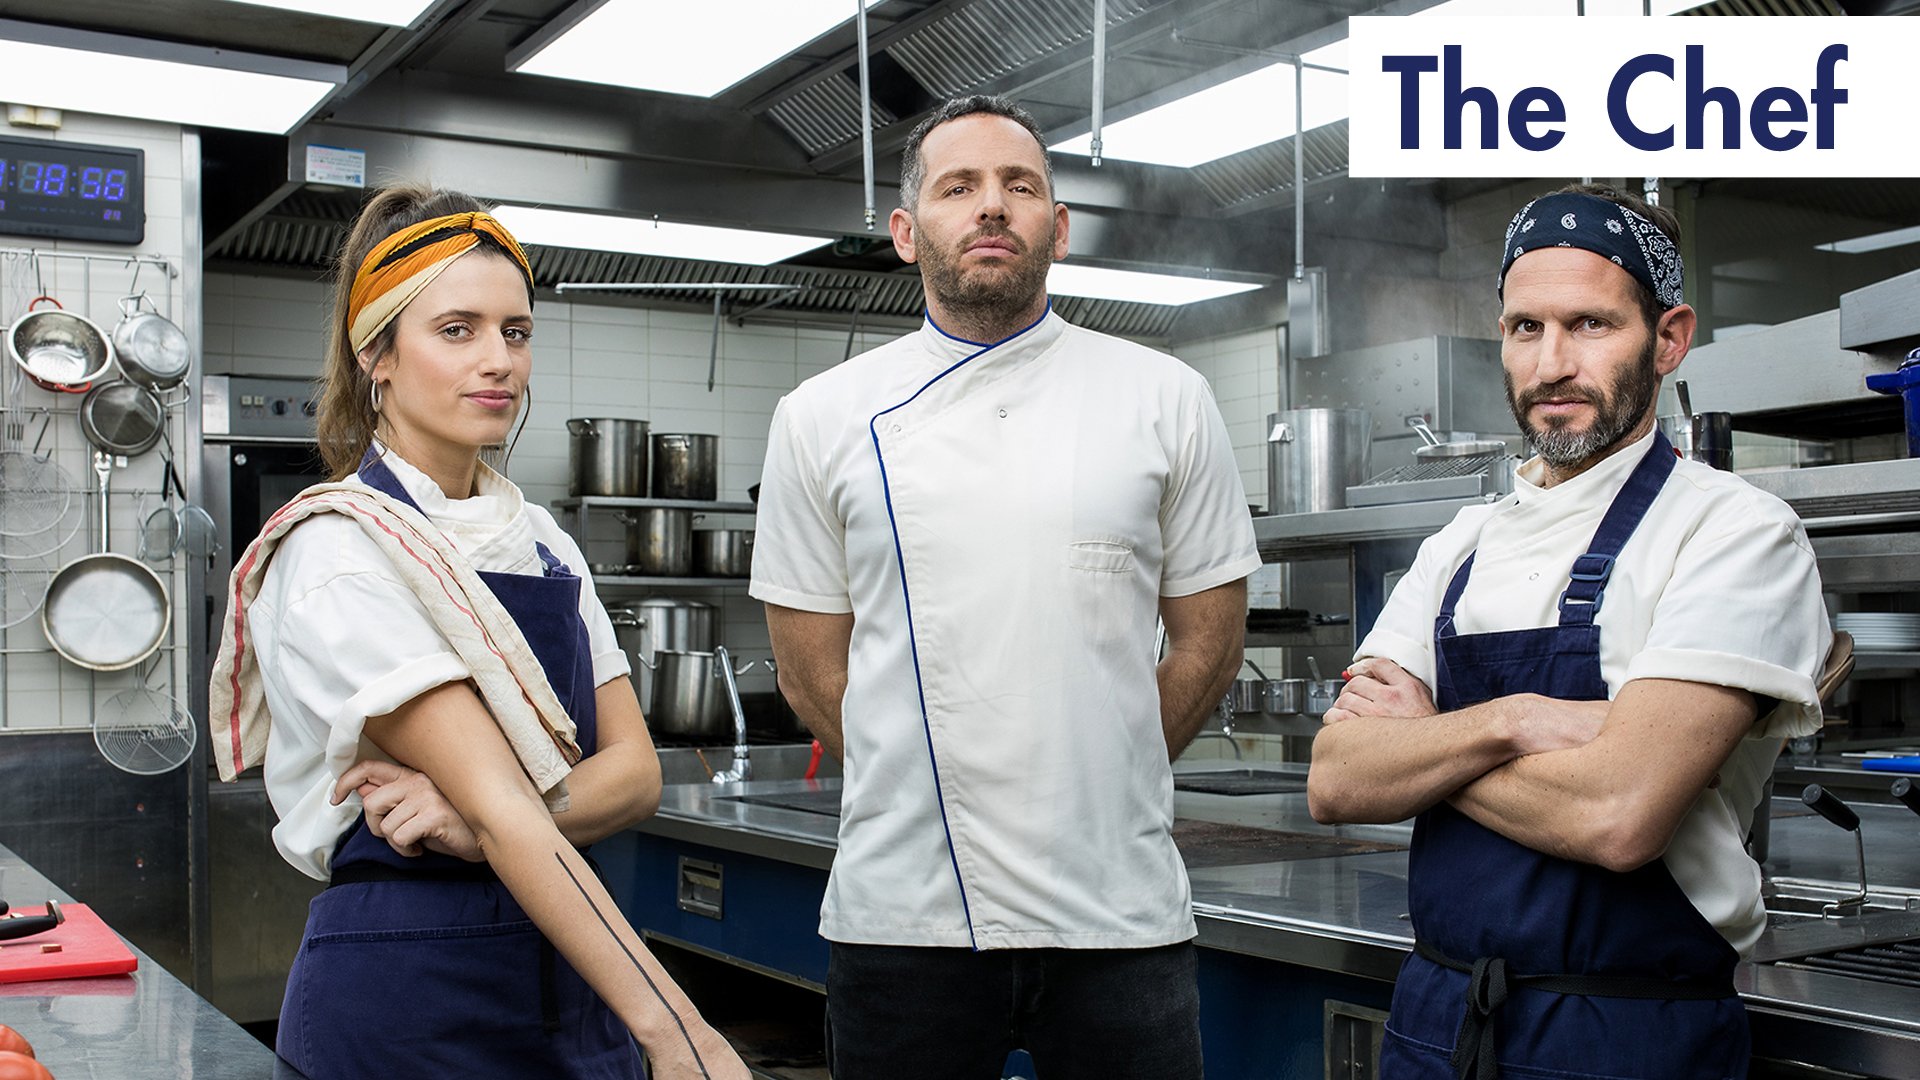 the chef movie review